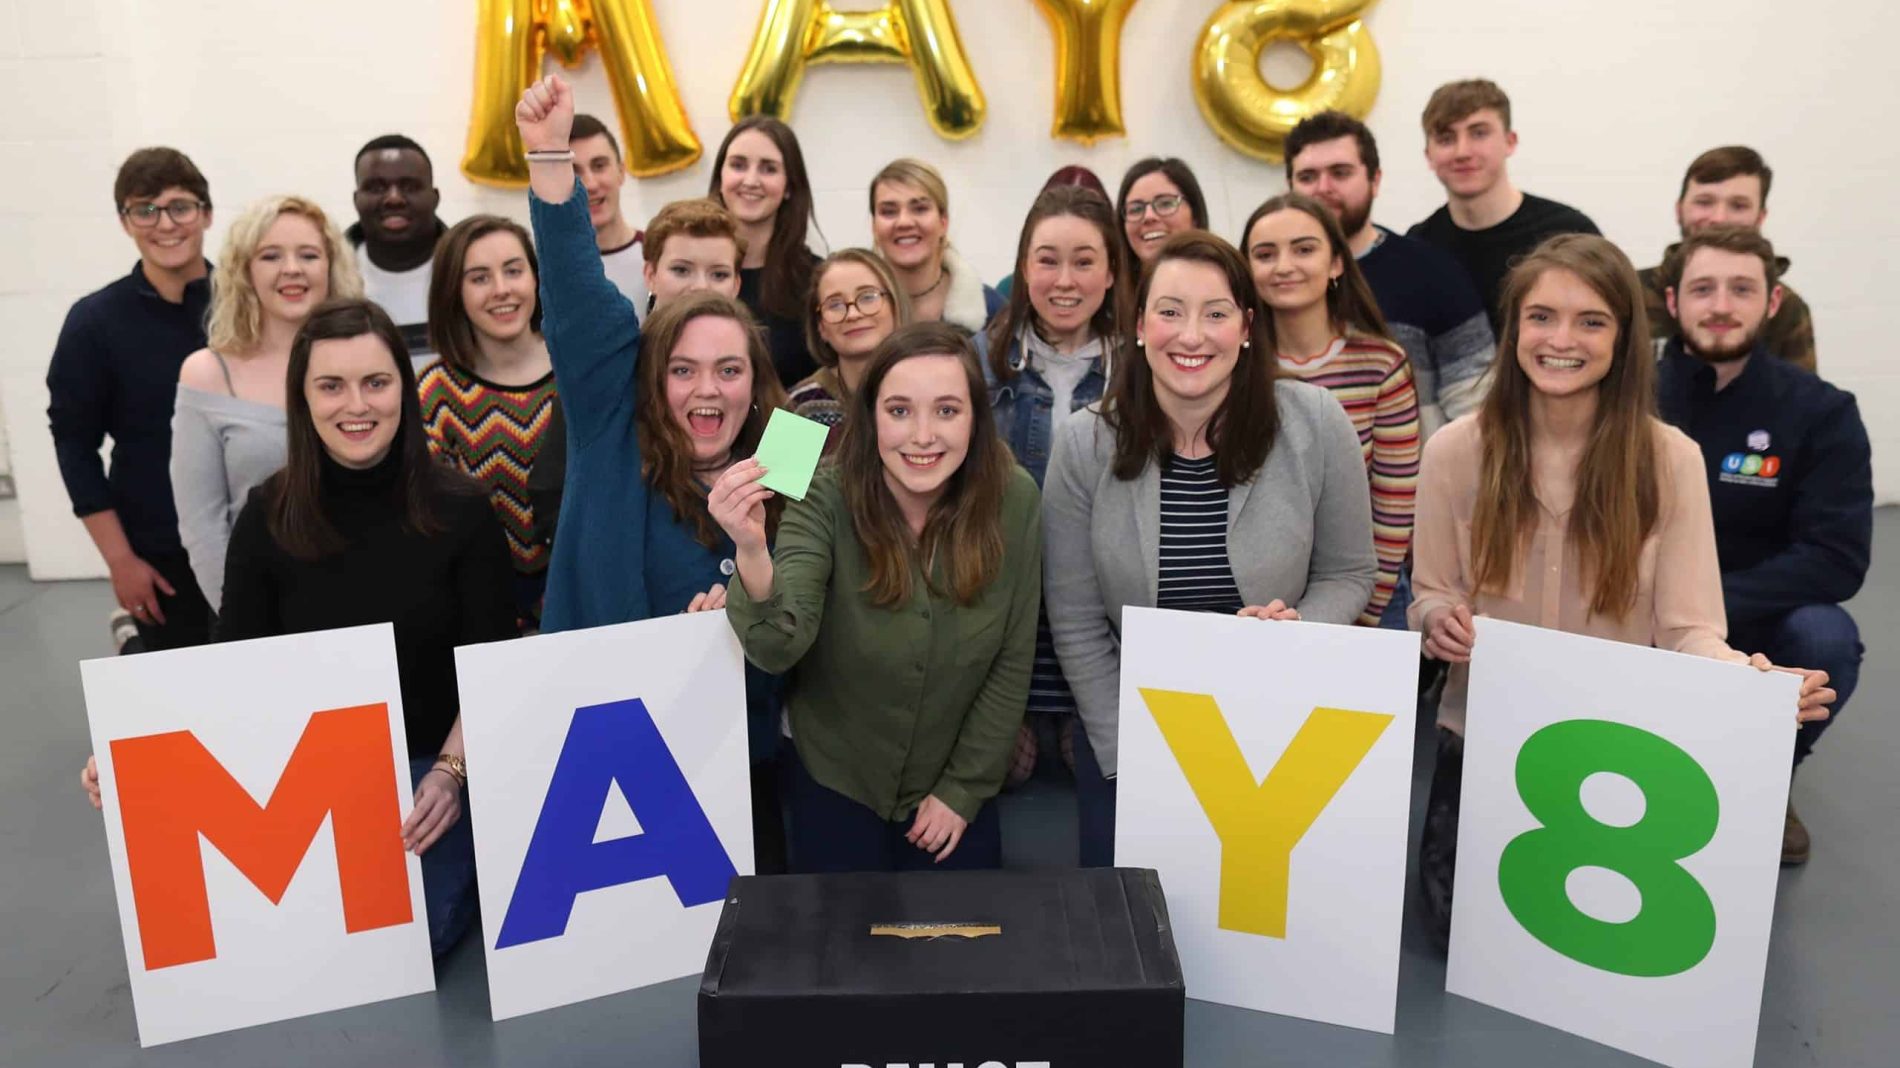 Young people with May 8 signs, in front of a ballot box